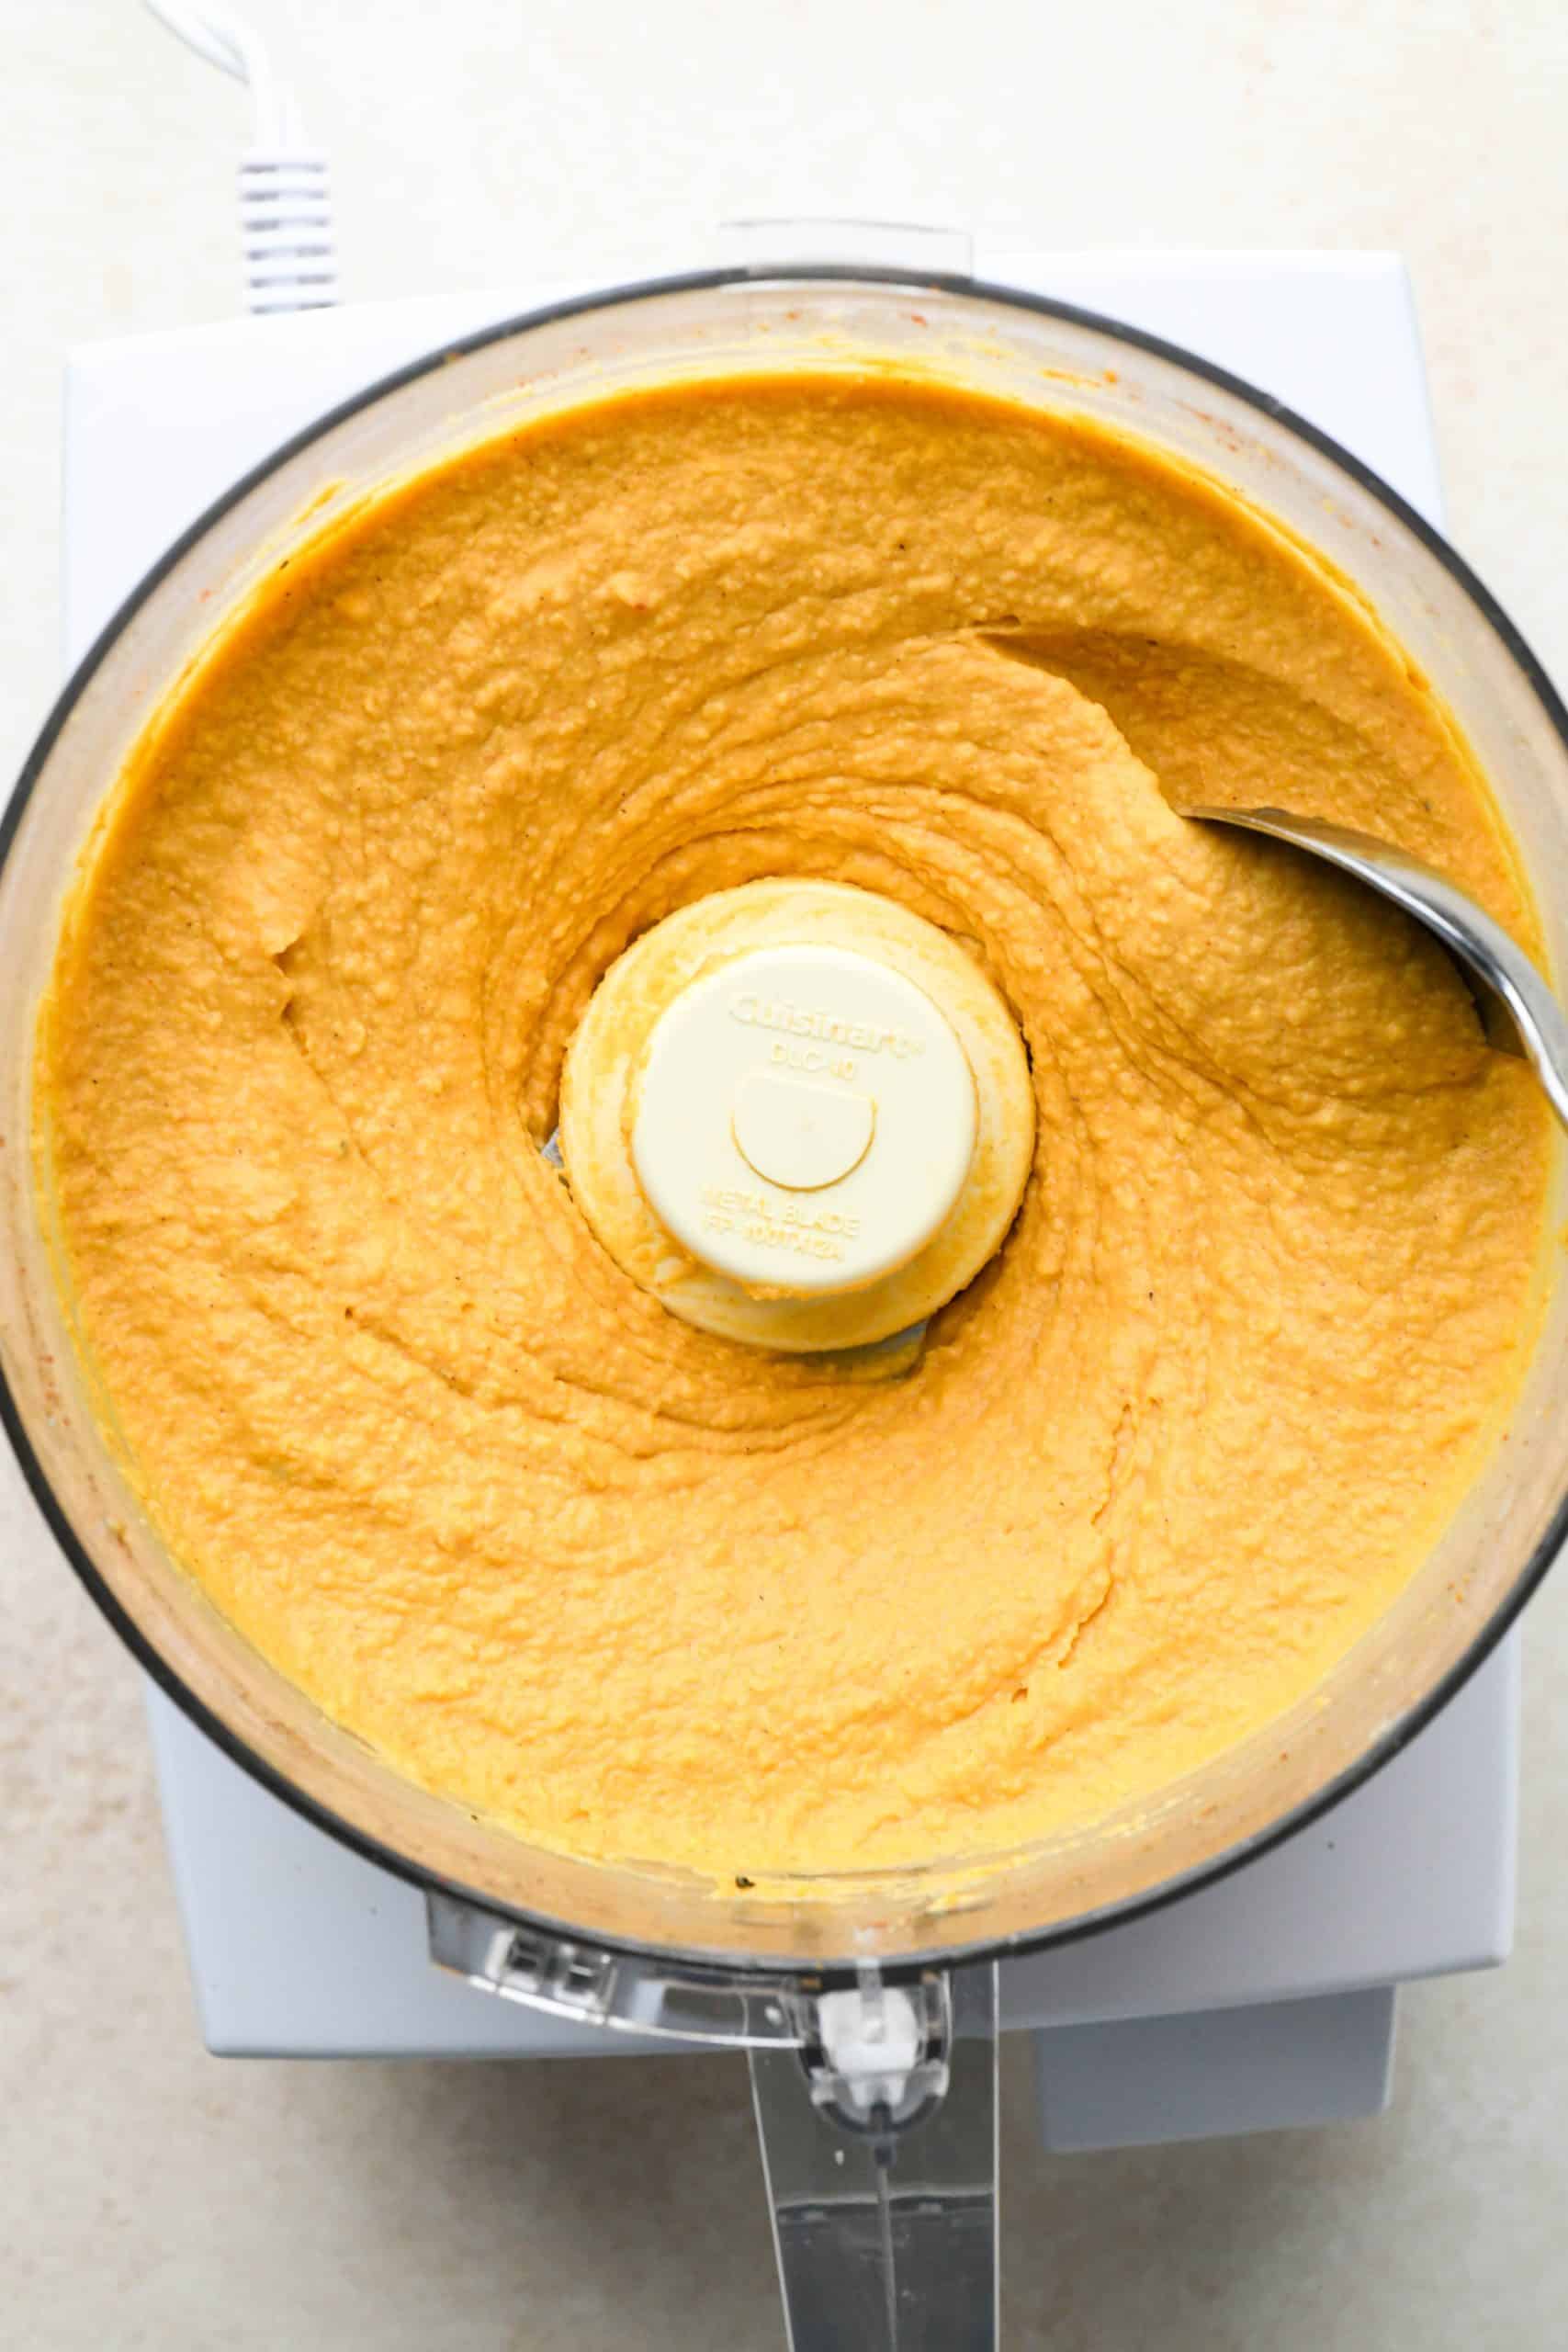 How to make Sweet Potato Hummus: Smooth and creamy hummus blended together in food processor container.